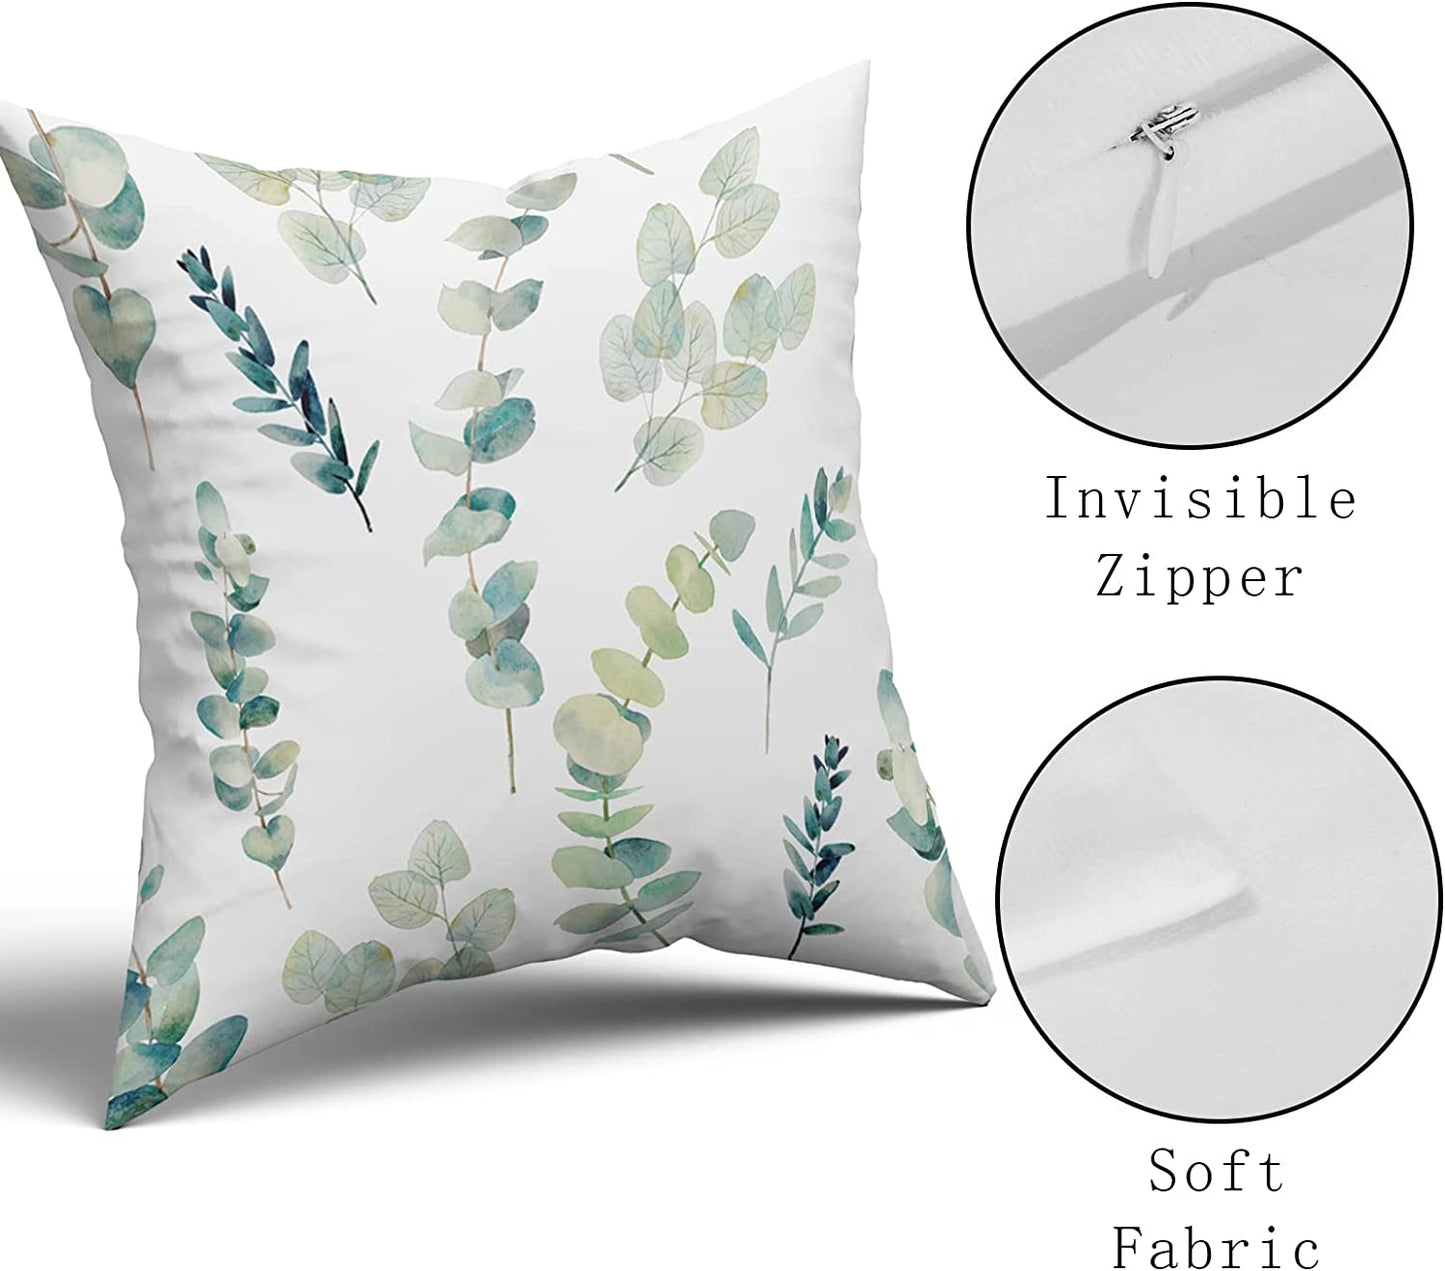 Sage Green Pillow Covers 18X18 Inch Eucalyptus Branches Floral Watercolor Decorative Green Leaf Print Throw Pillow for Home Sofa Cotton Seafoam Blue Green Gray Square Cushion Pillowscase  Set of 2